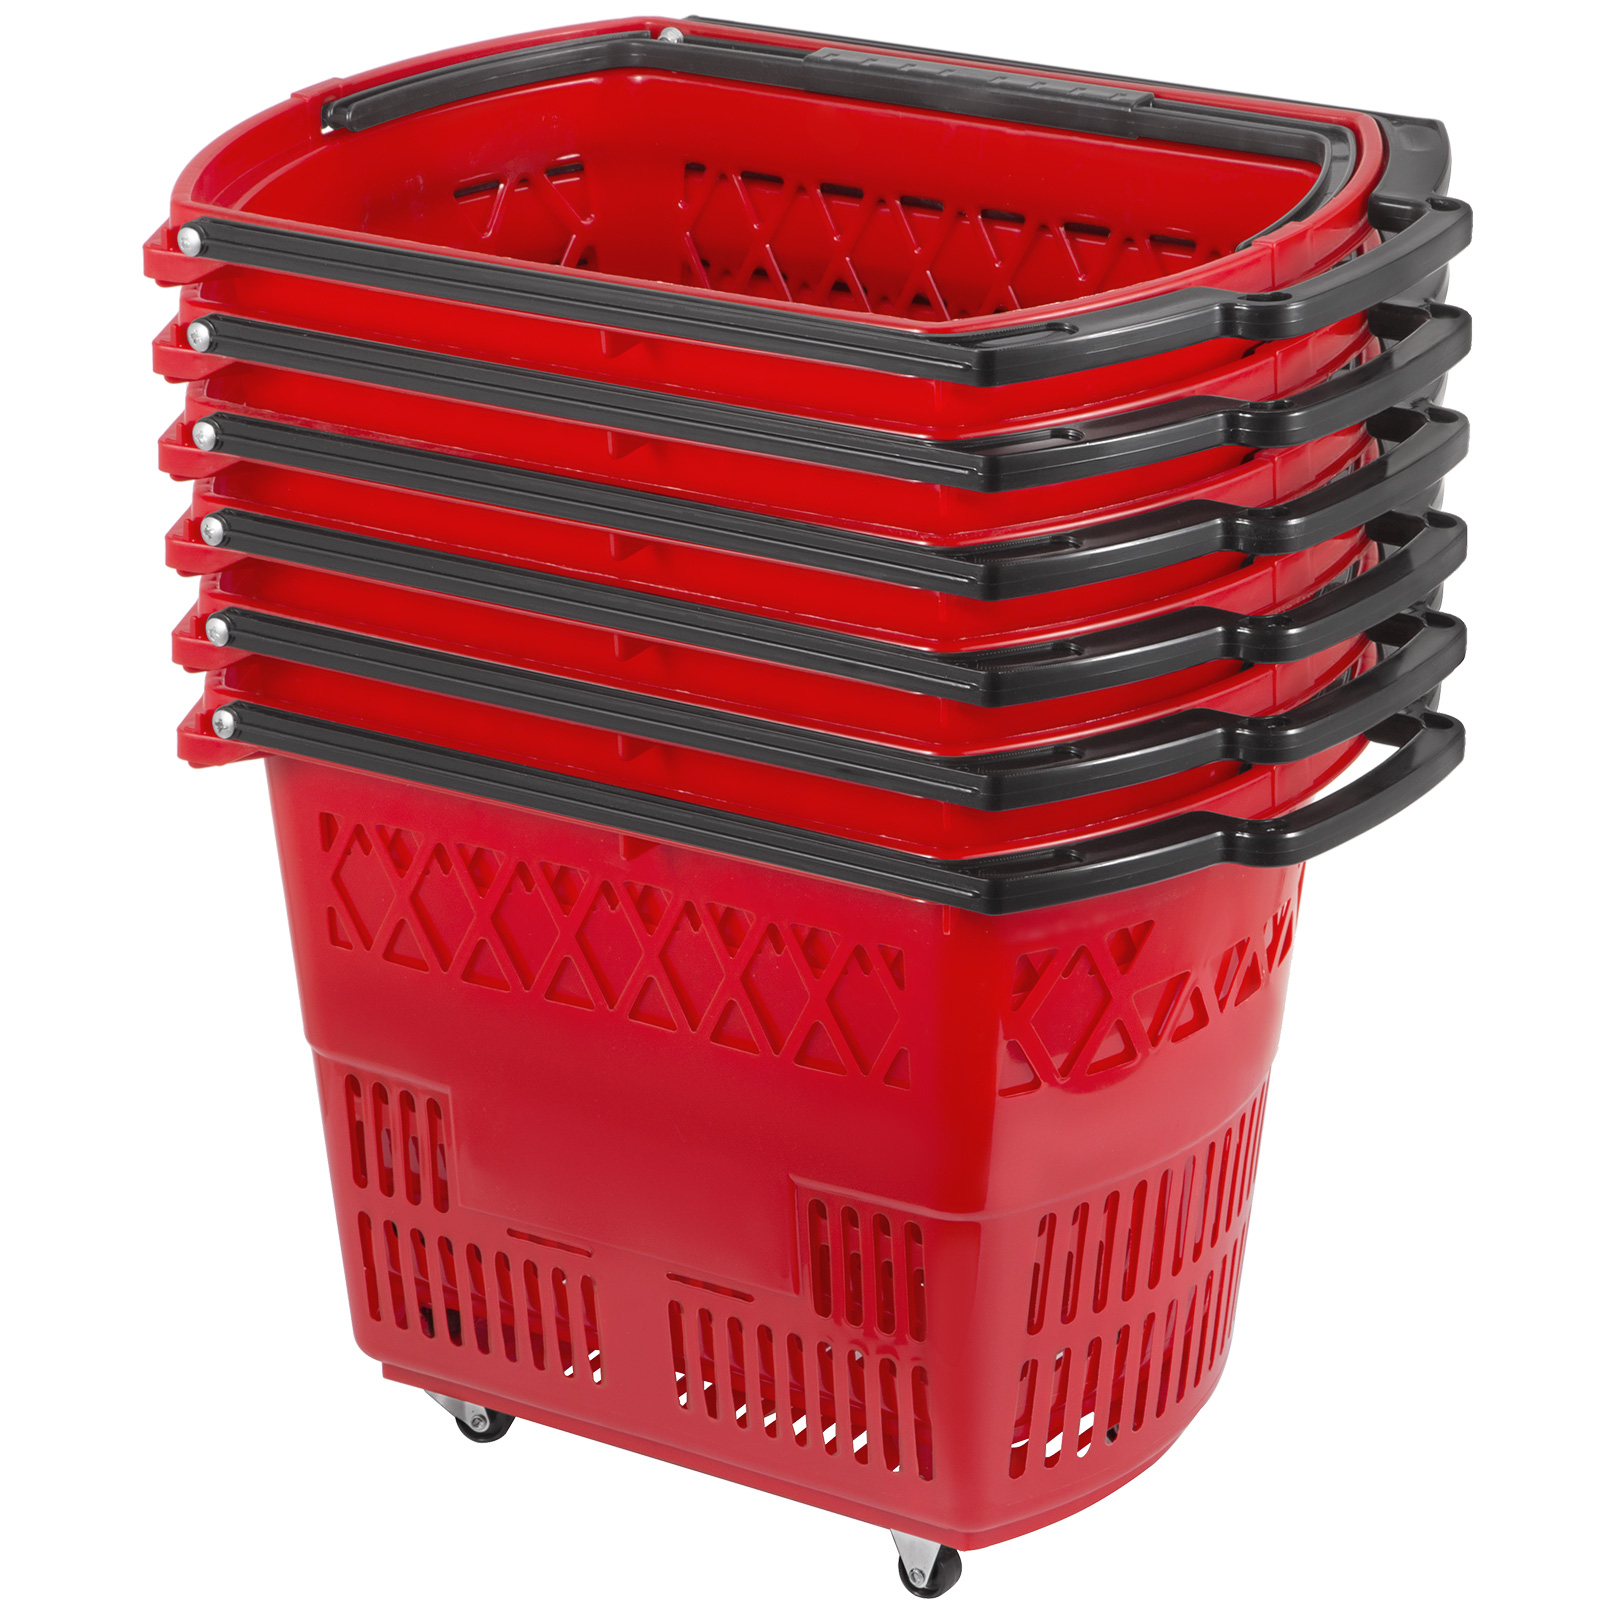 Shopping basket,75 lbs/34 kg Capacity,Red